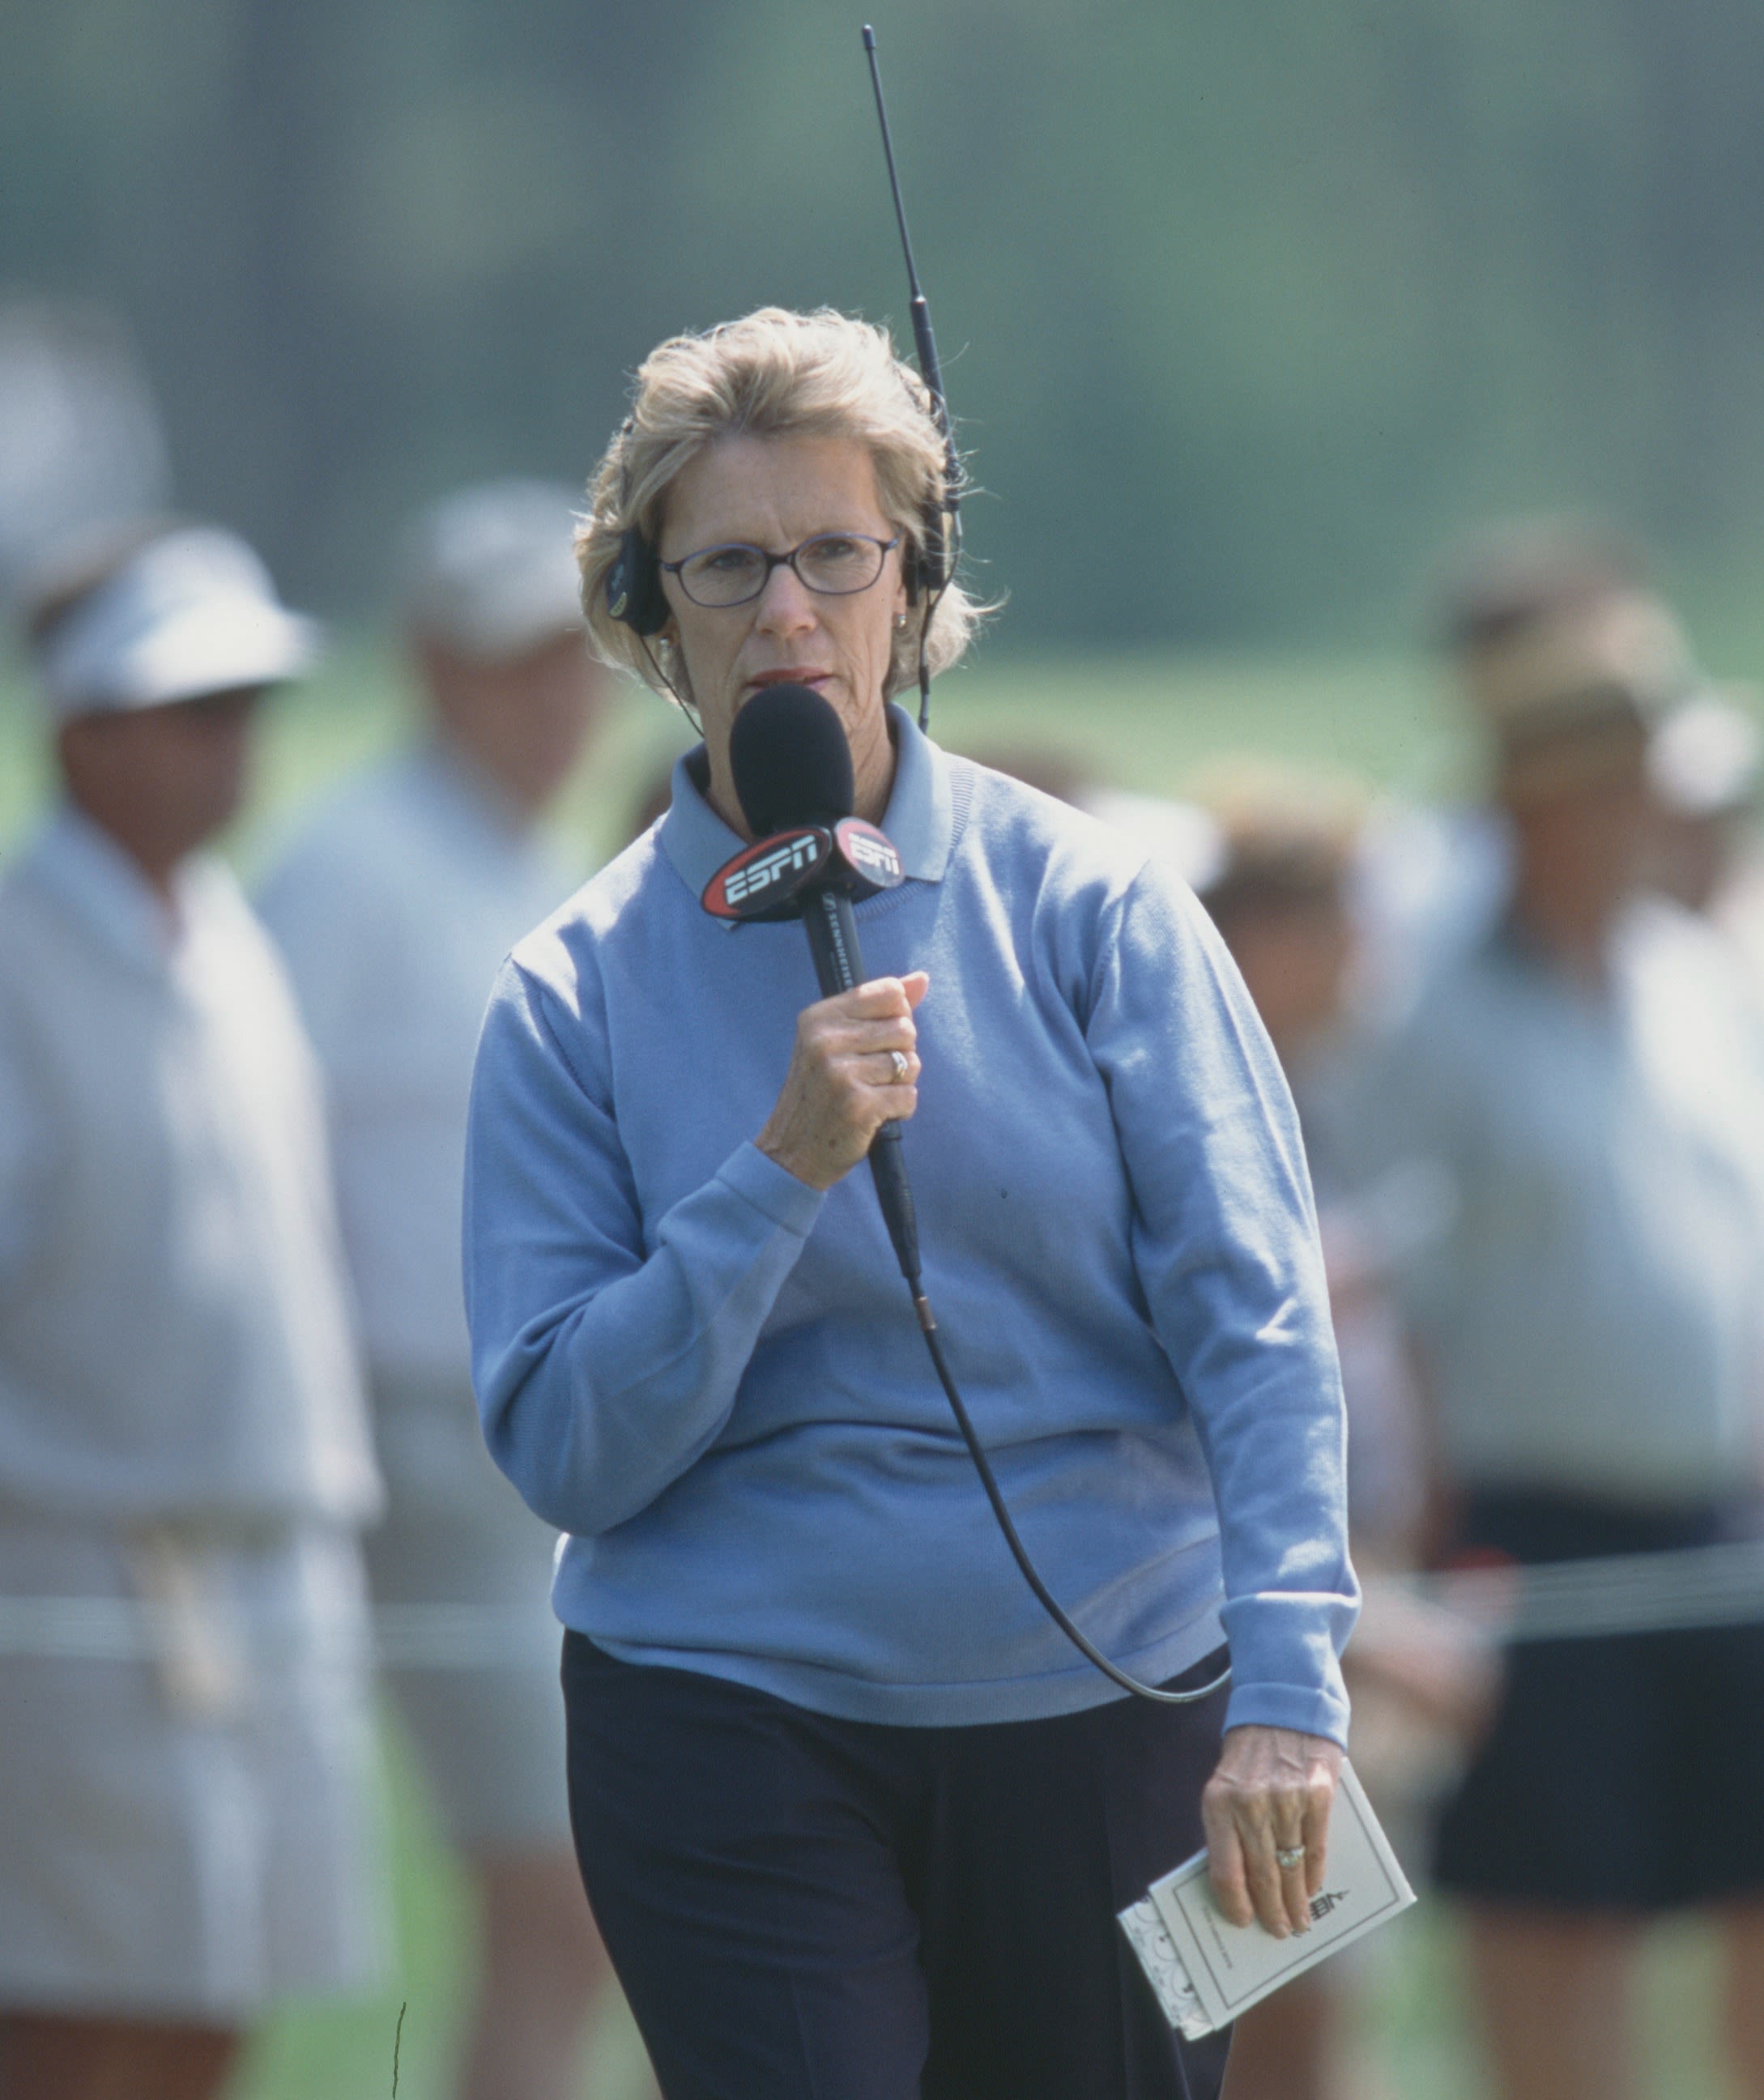 Rankin started her golf broadcasting career with ABC.